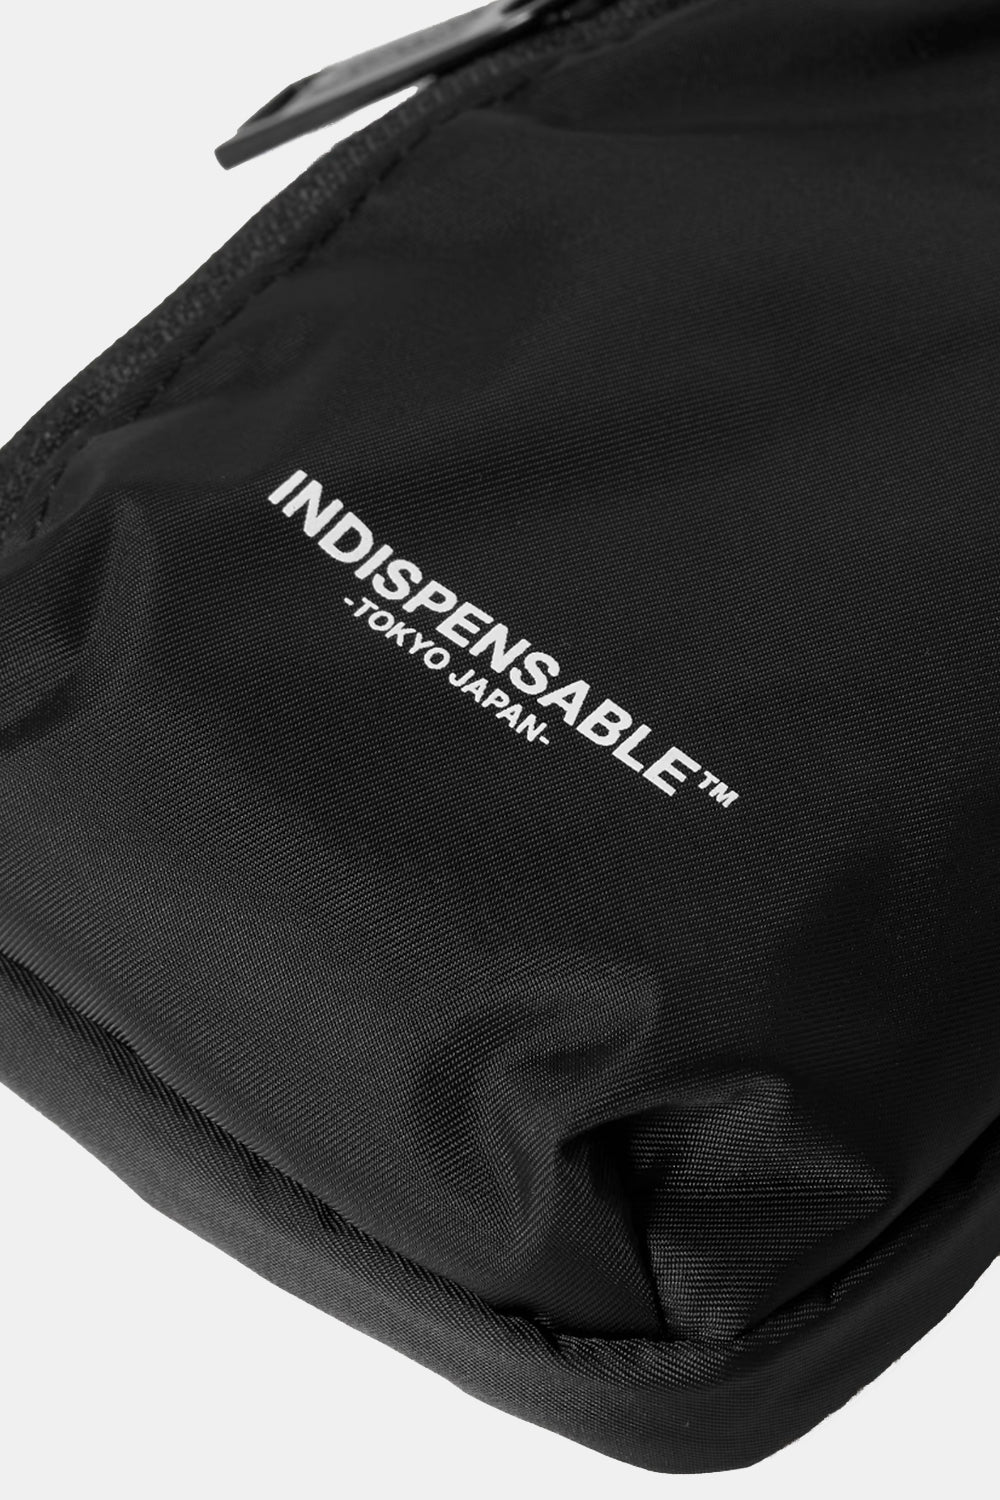 Indispensable IDP Neck Pouch Cell Econyl (Black) | Number Six